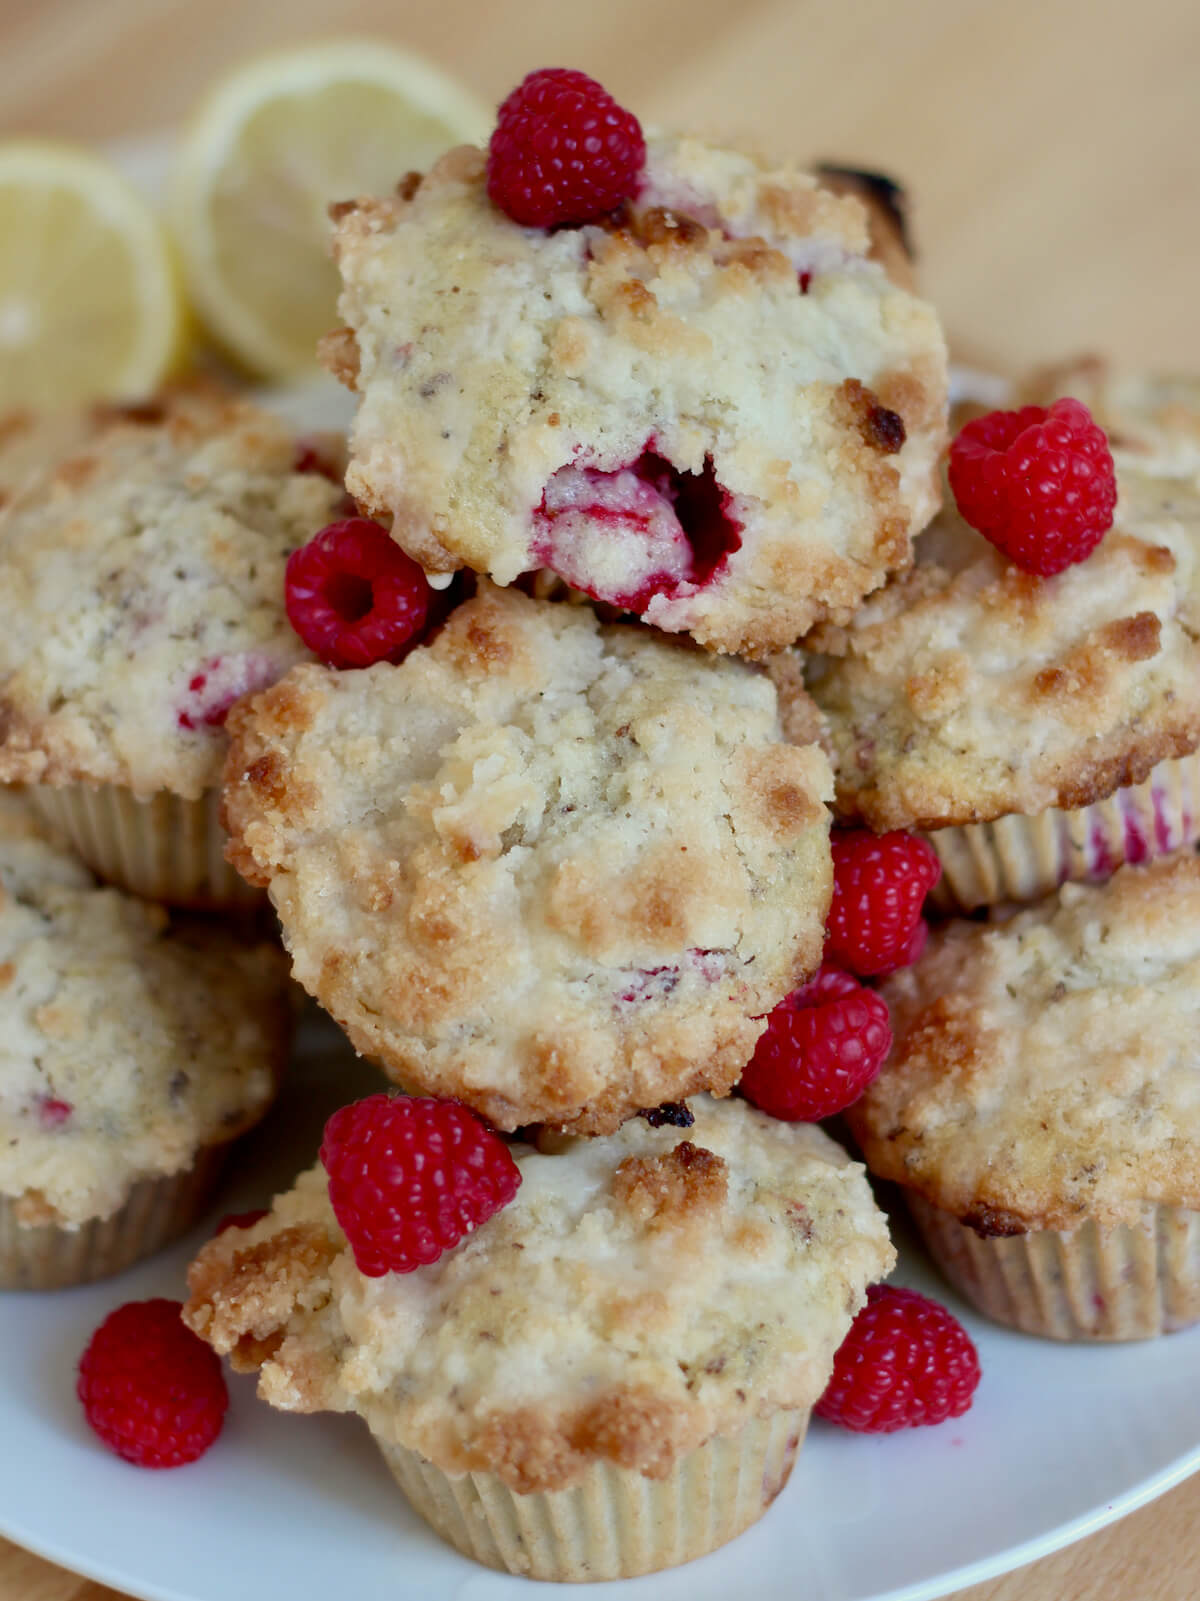 A pile of vegan raspberry muffins garnished with fresh raspberries on a white plate.